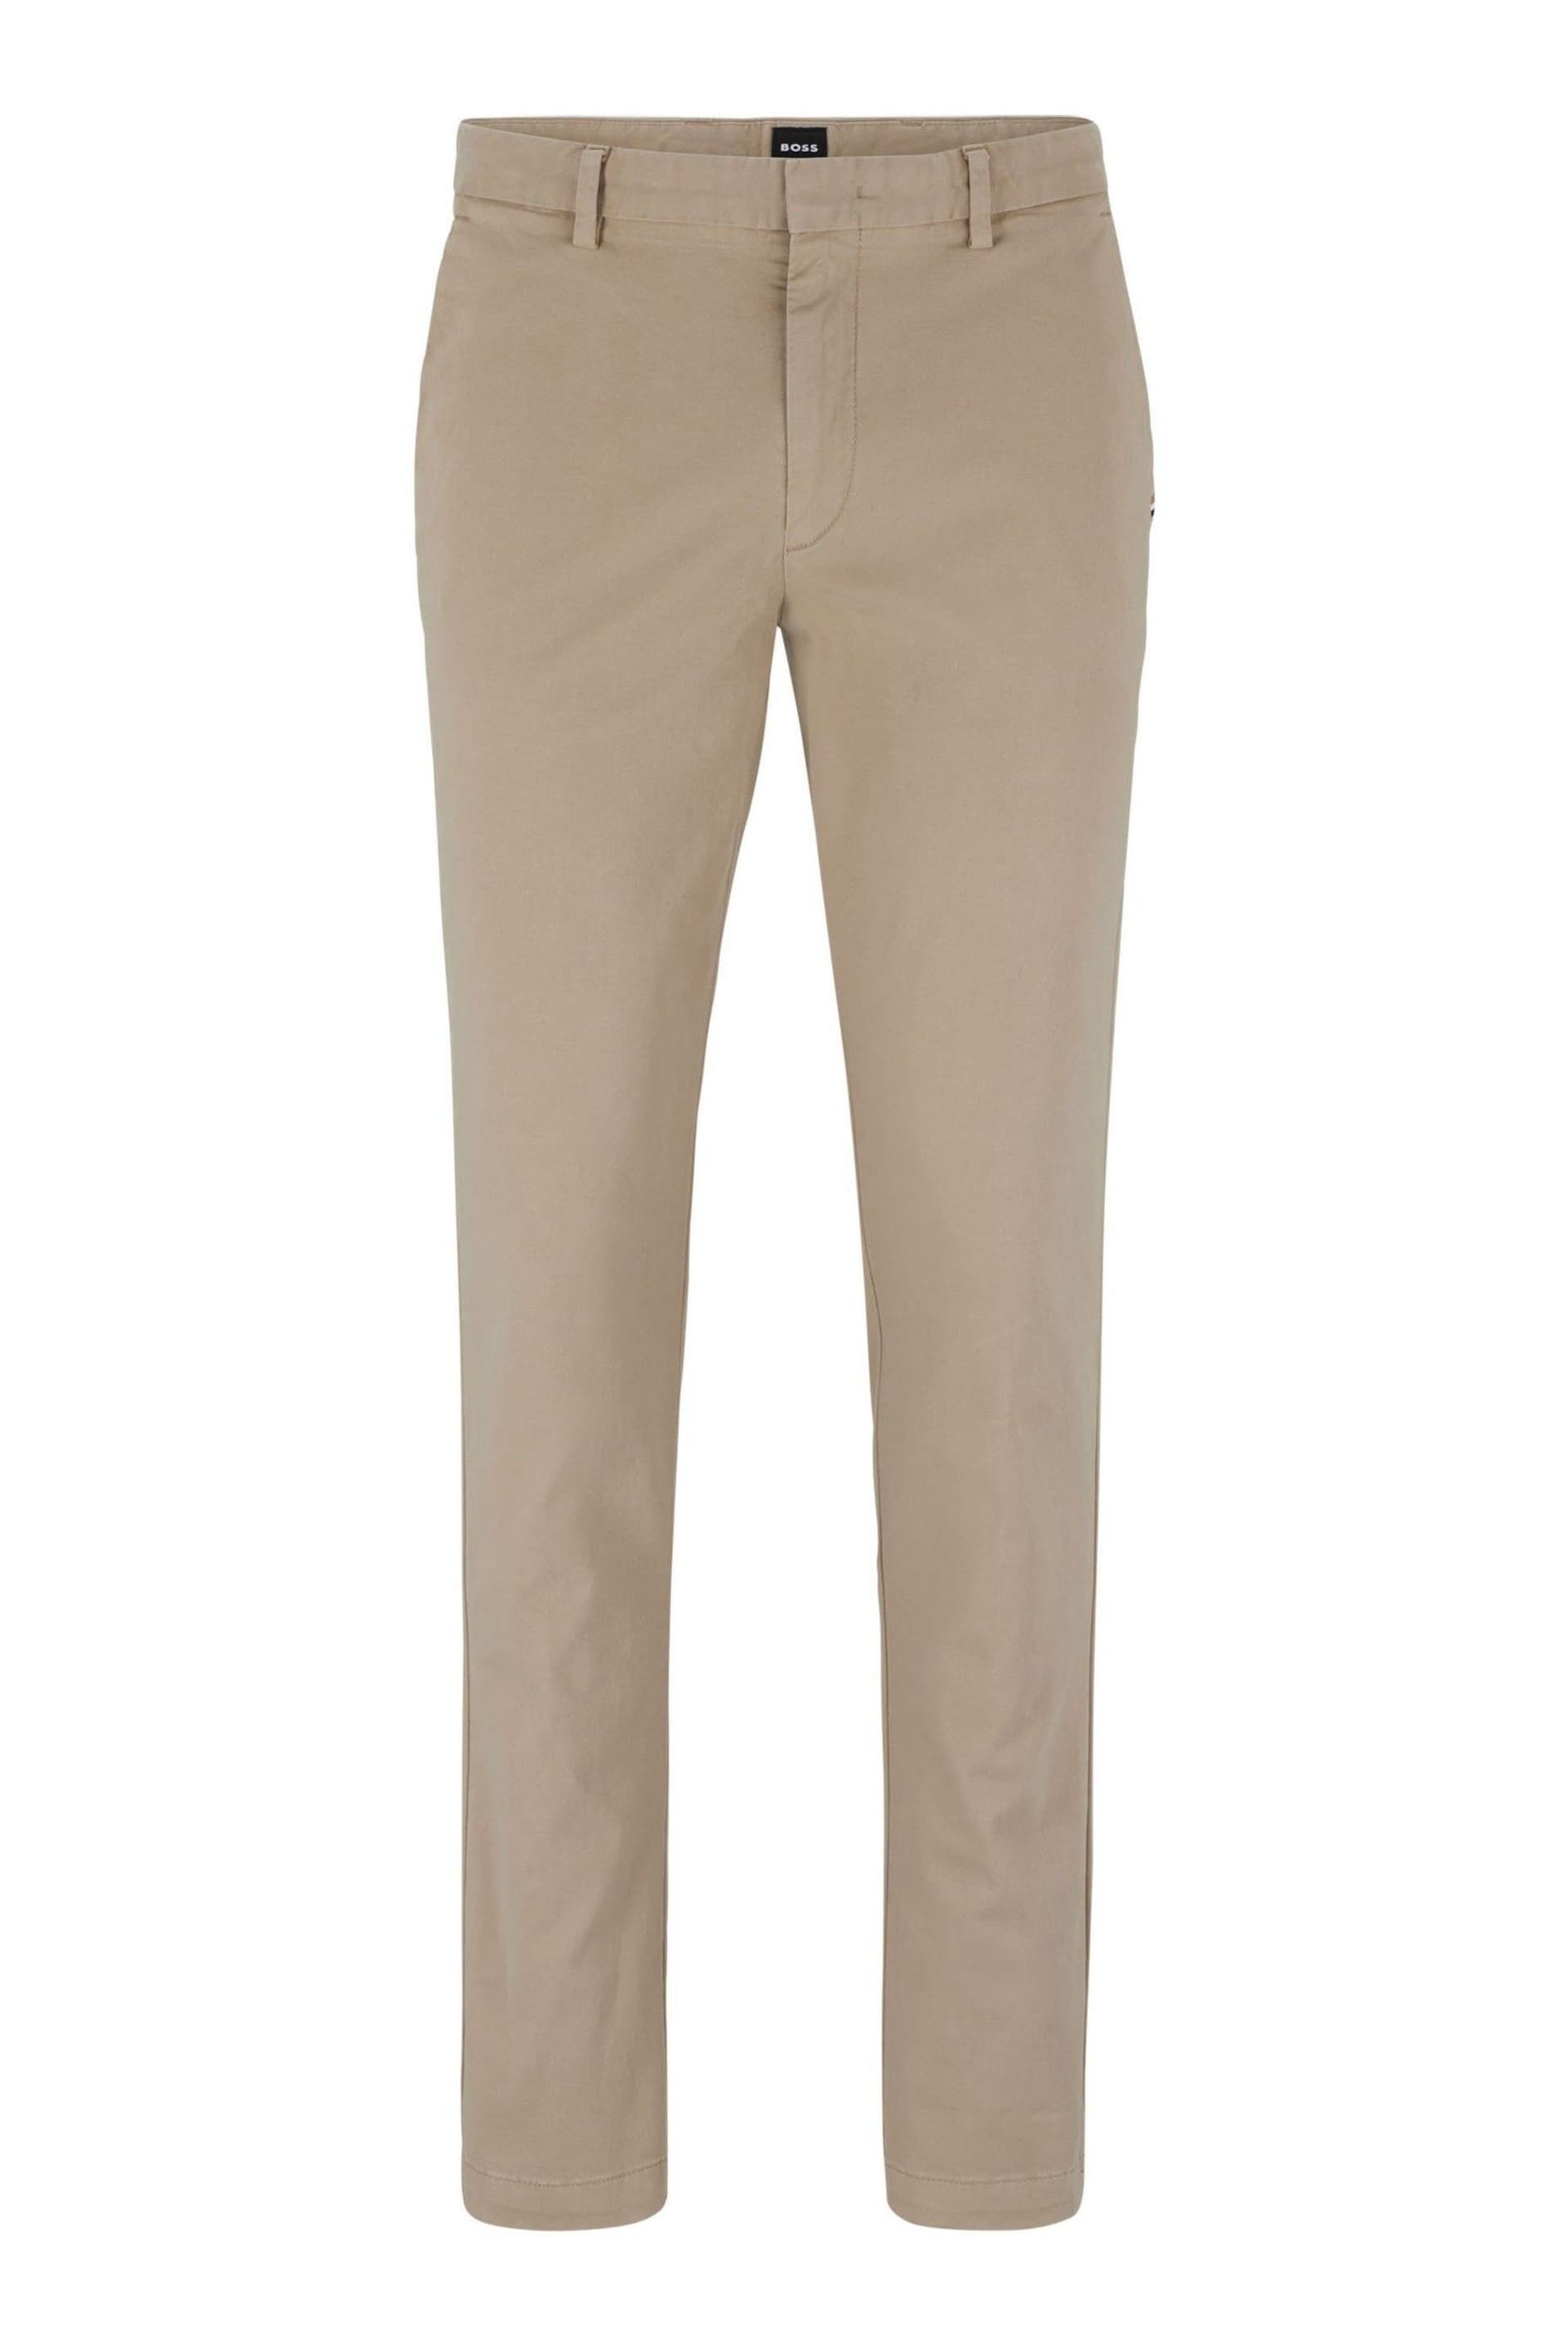 BOSS Natural Slim Fit Stretch Cotton Gabardine Chinos - Image 5 of 5